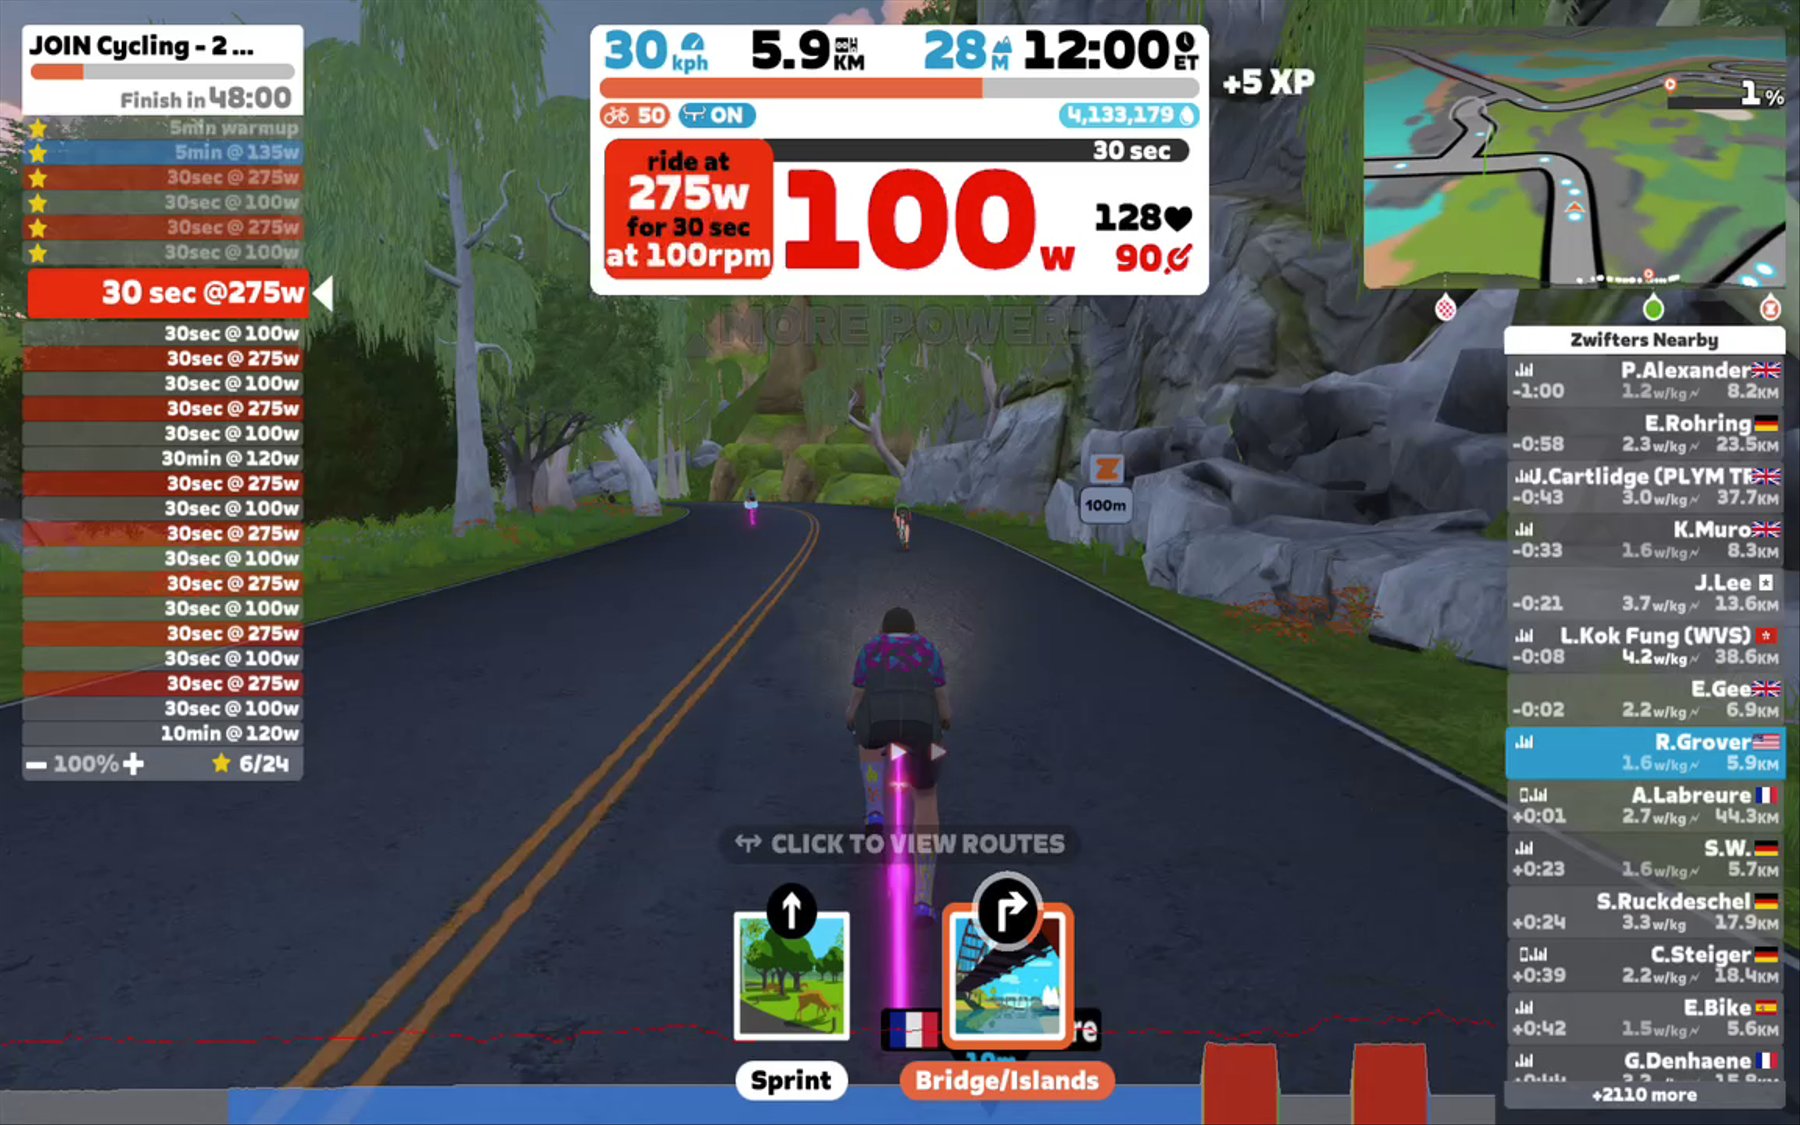 Zwift - JOIN Cycling - 2 sets 30-30s in Watopia